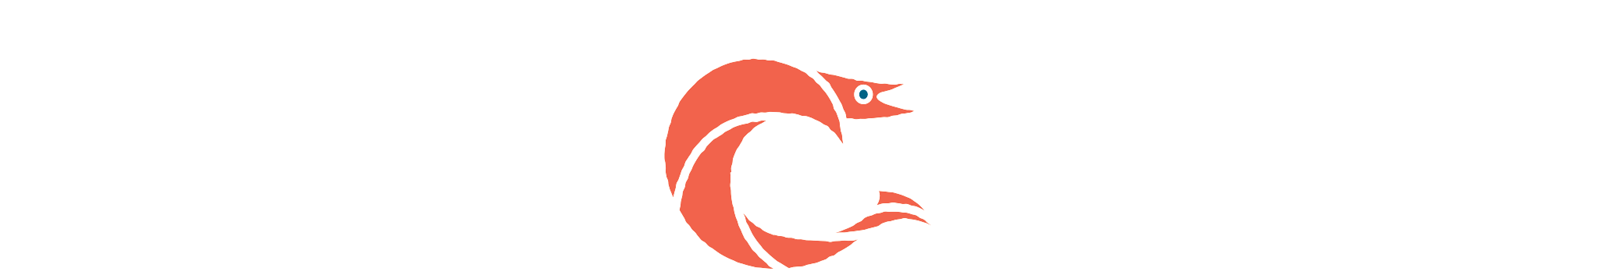 Shrimp Basket logo will link to the home page